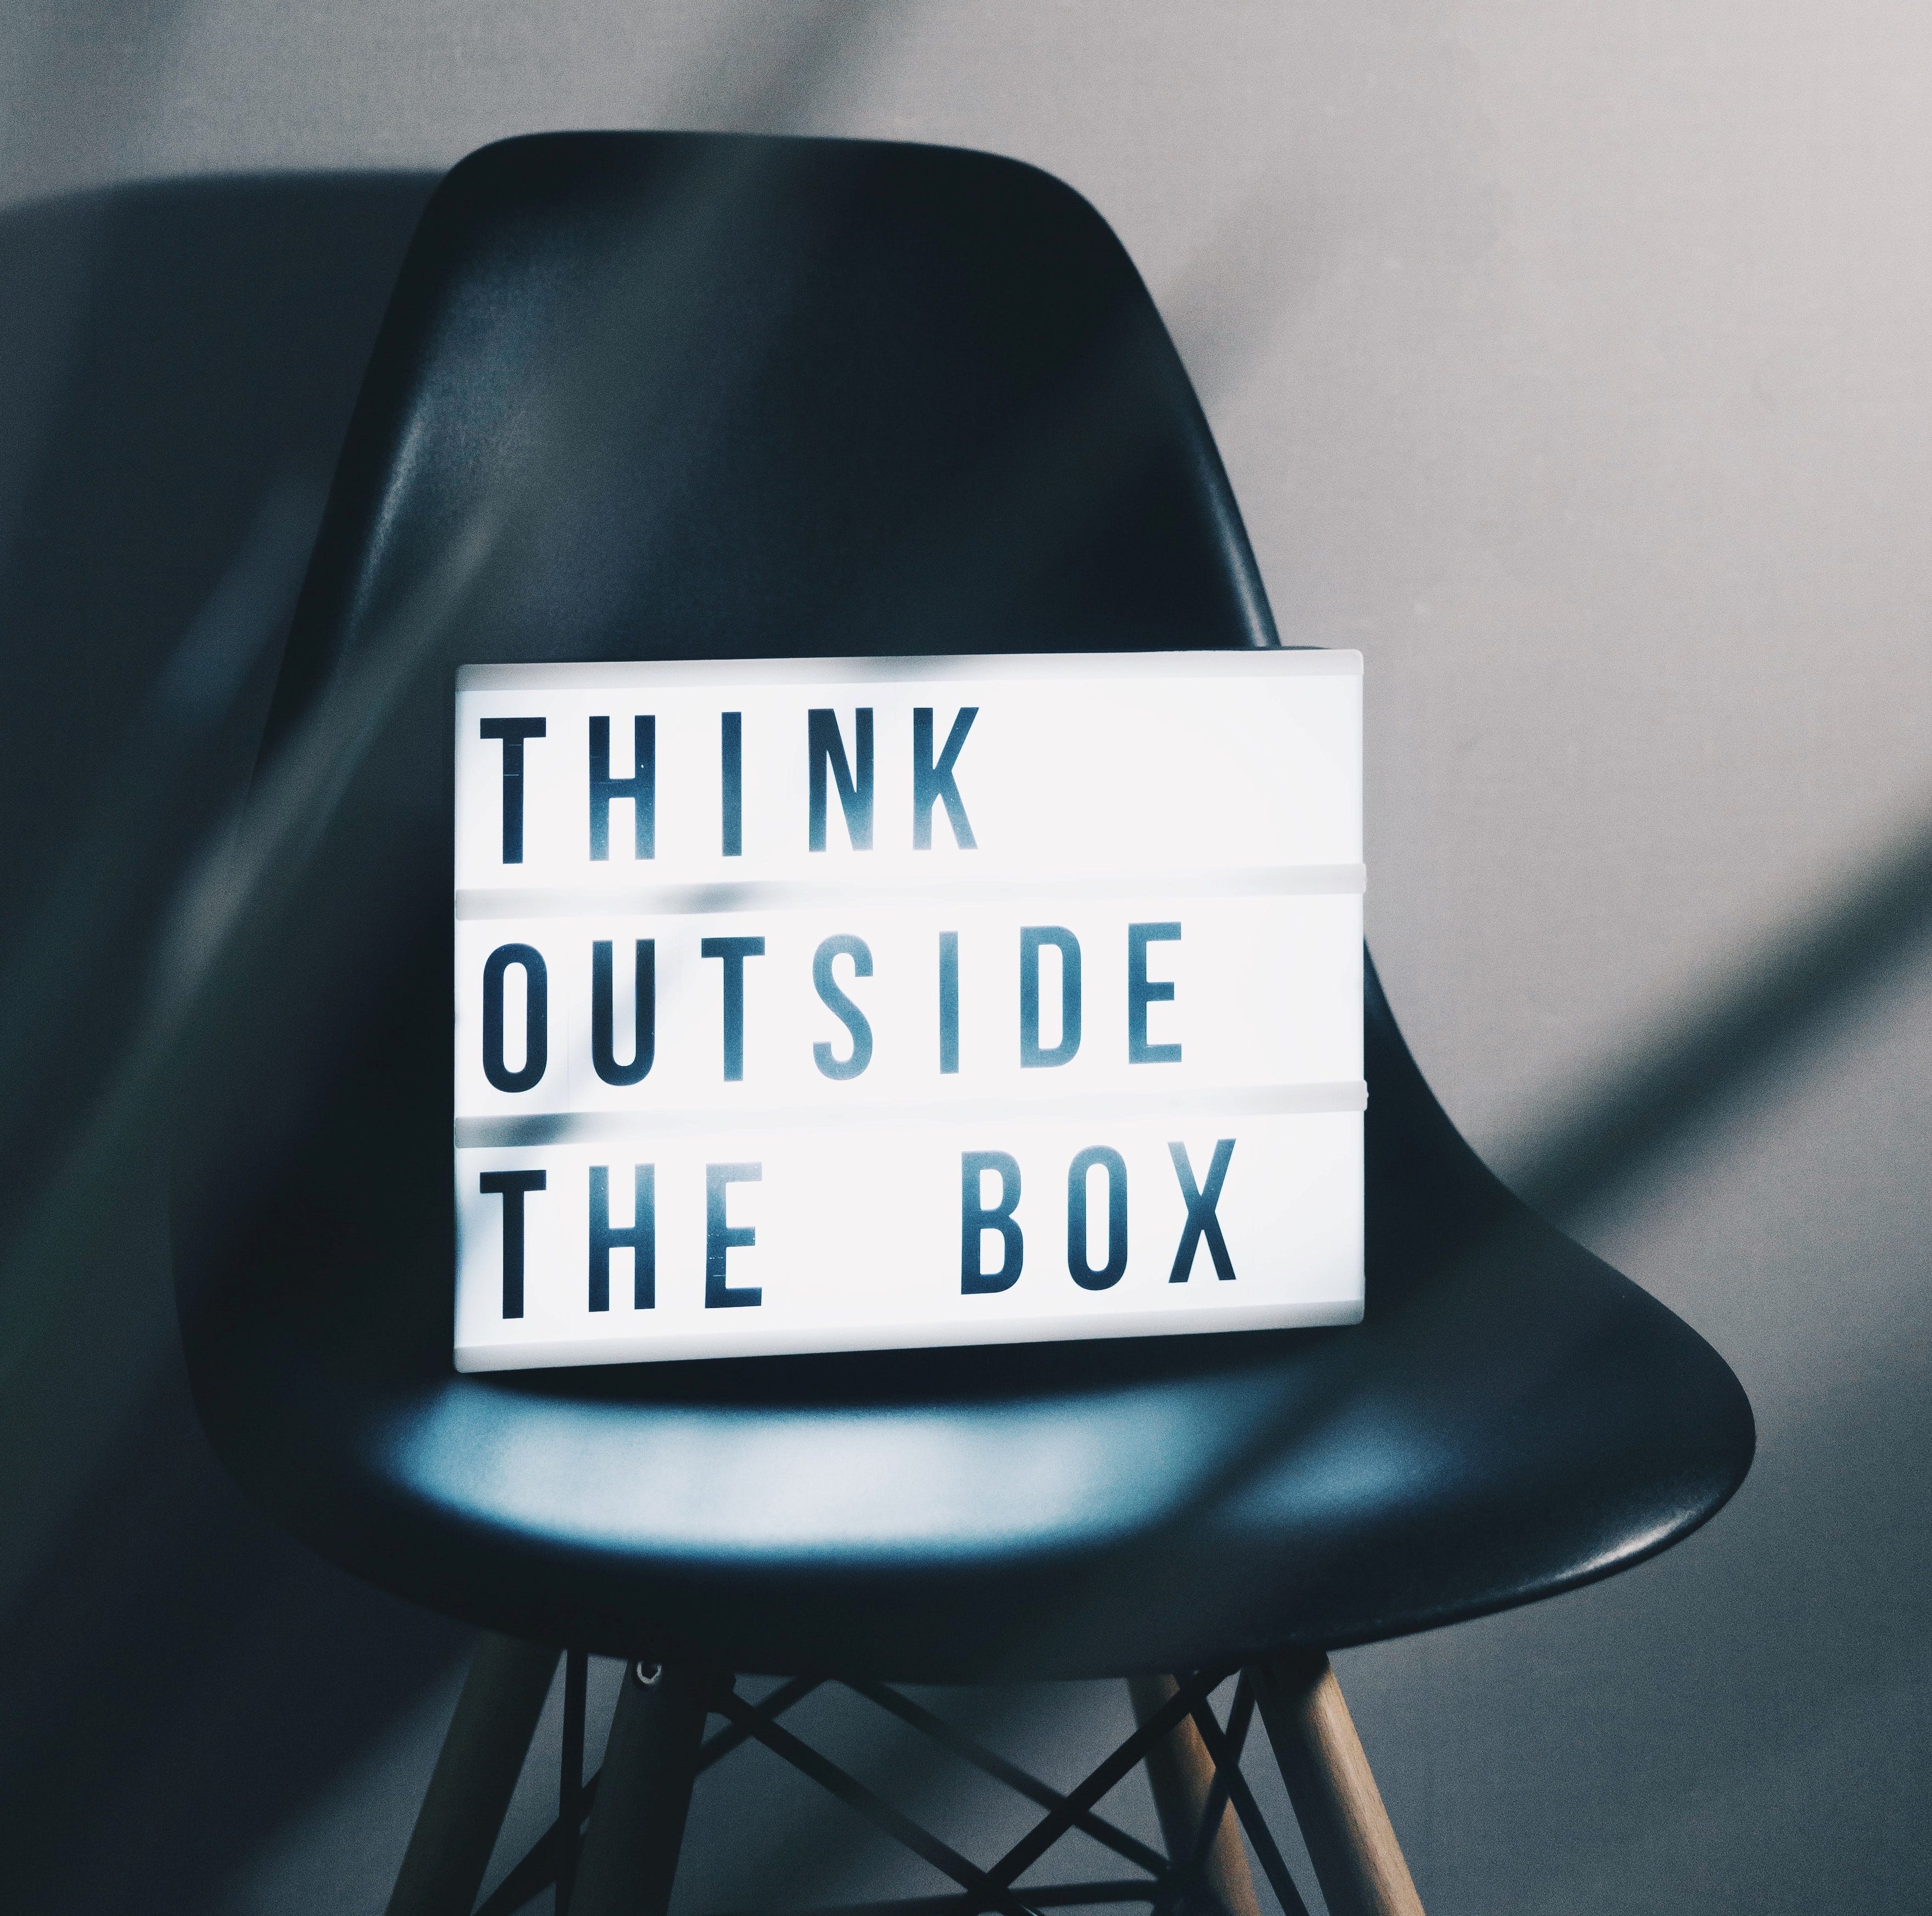 A white light box sign with black letters saying ‘Think outside the box’. The sign is sitting on black leather desk chair.